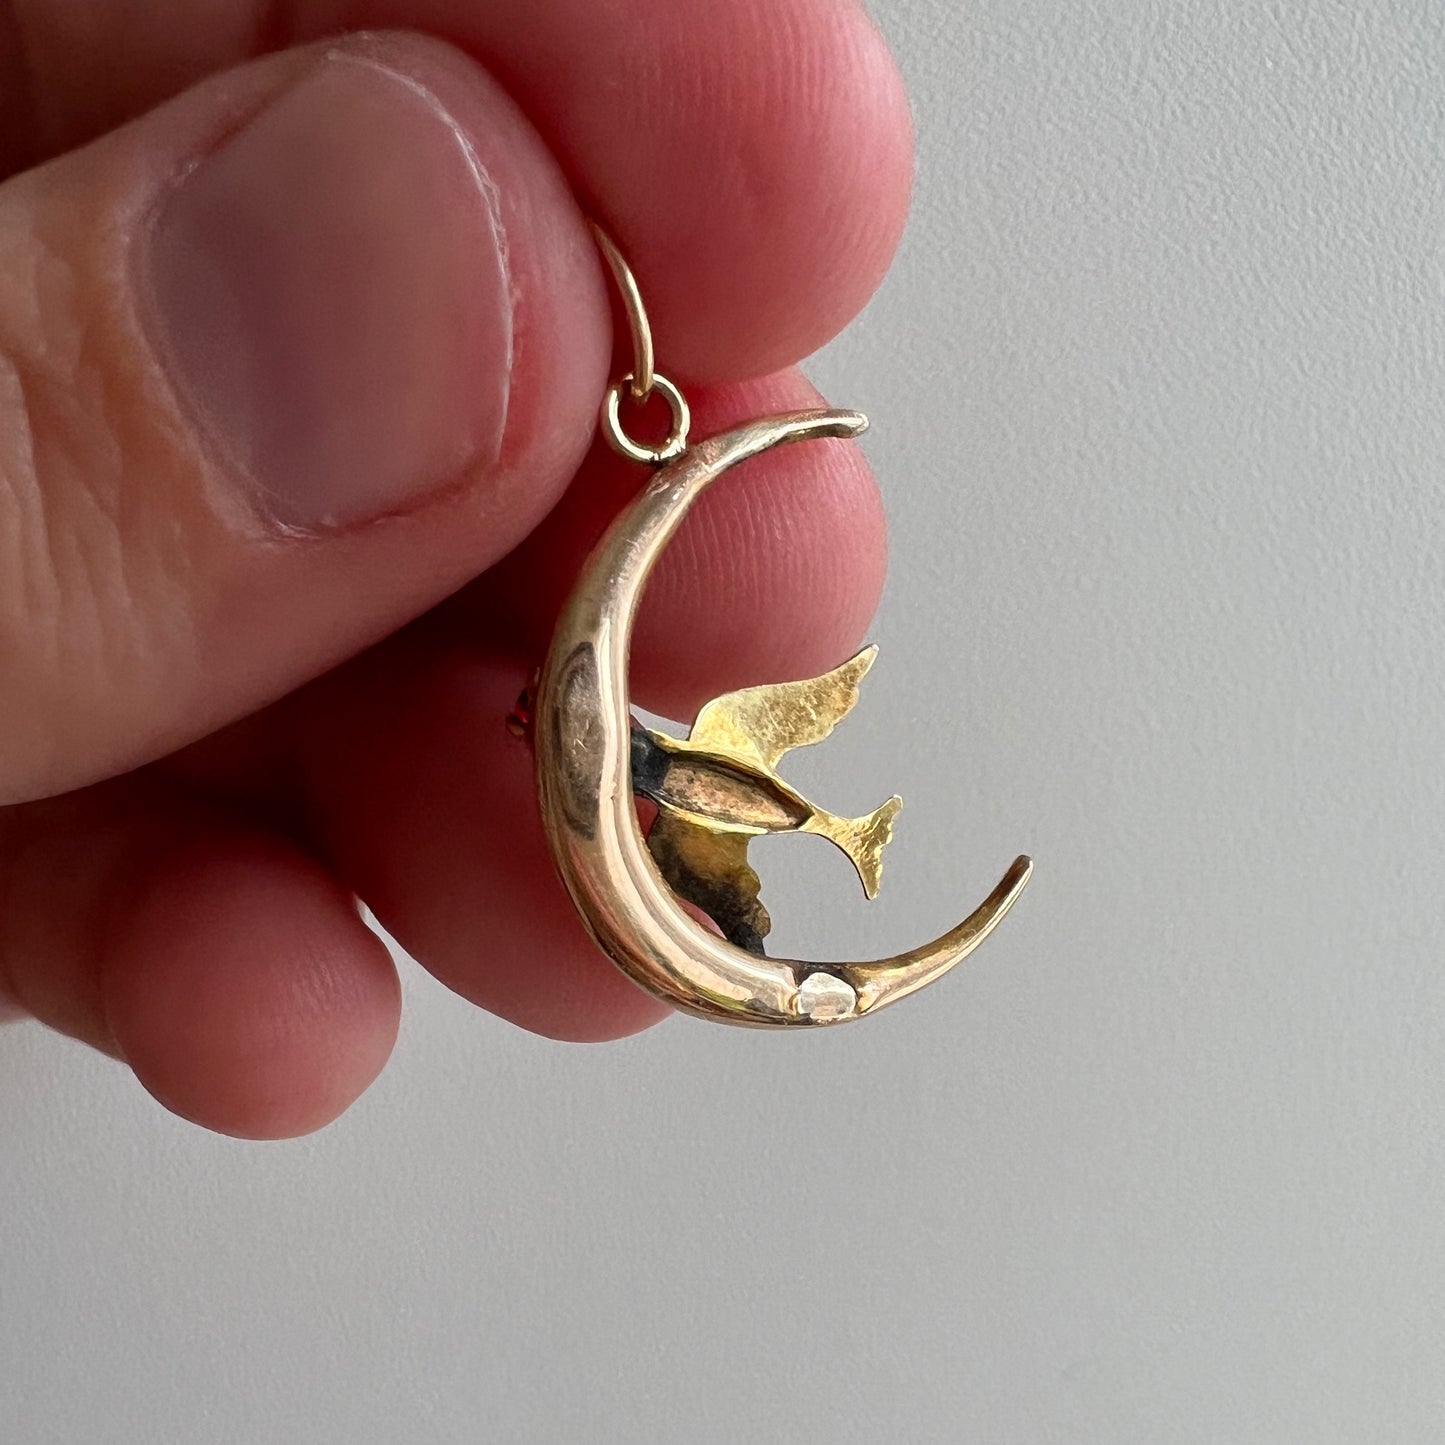 reimagined V I N T A G E // swallow eclipse / 10k crescent moon and bird pendant